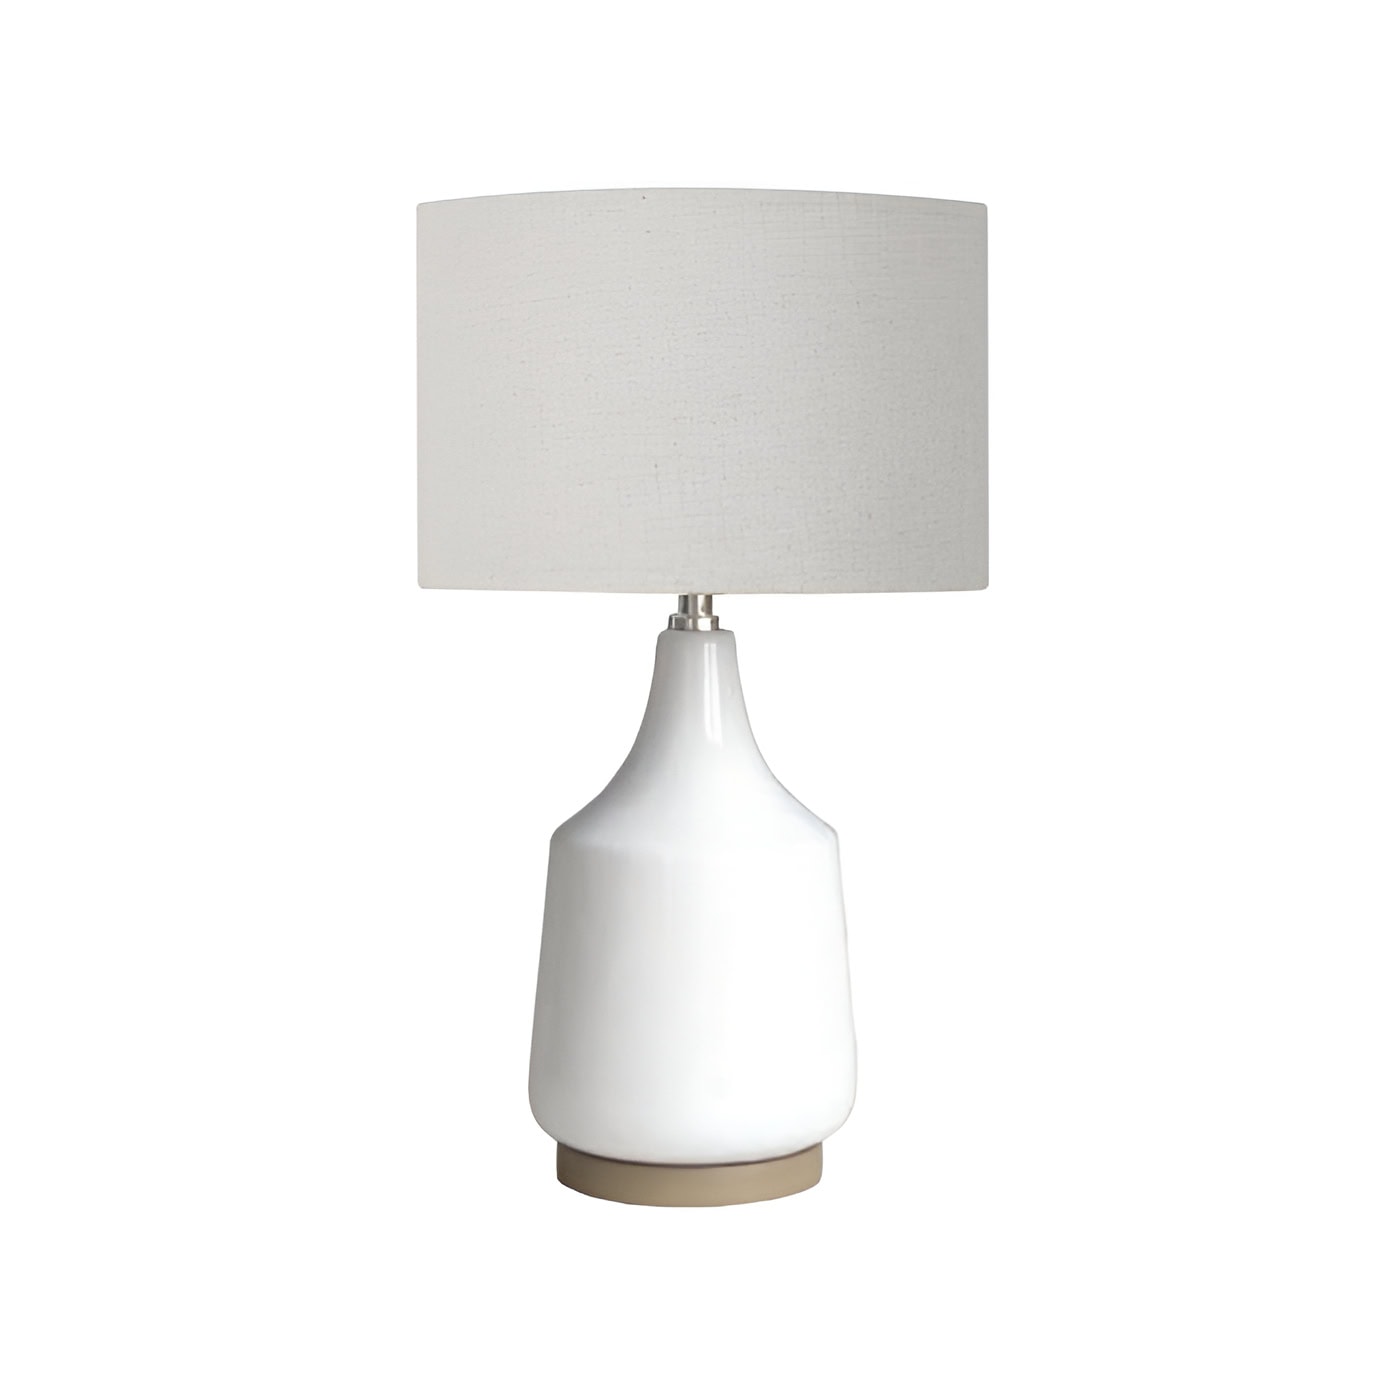 Product image of Torquay White Table Lamp with White Shade